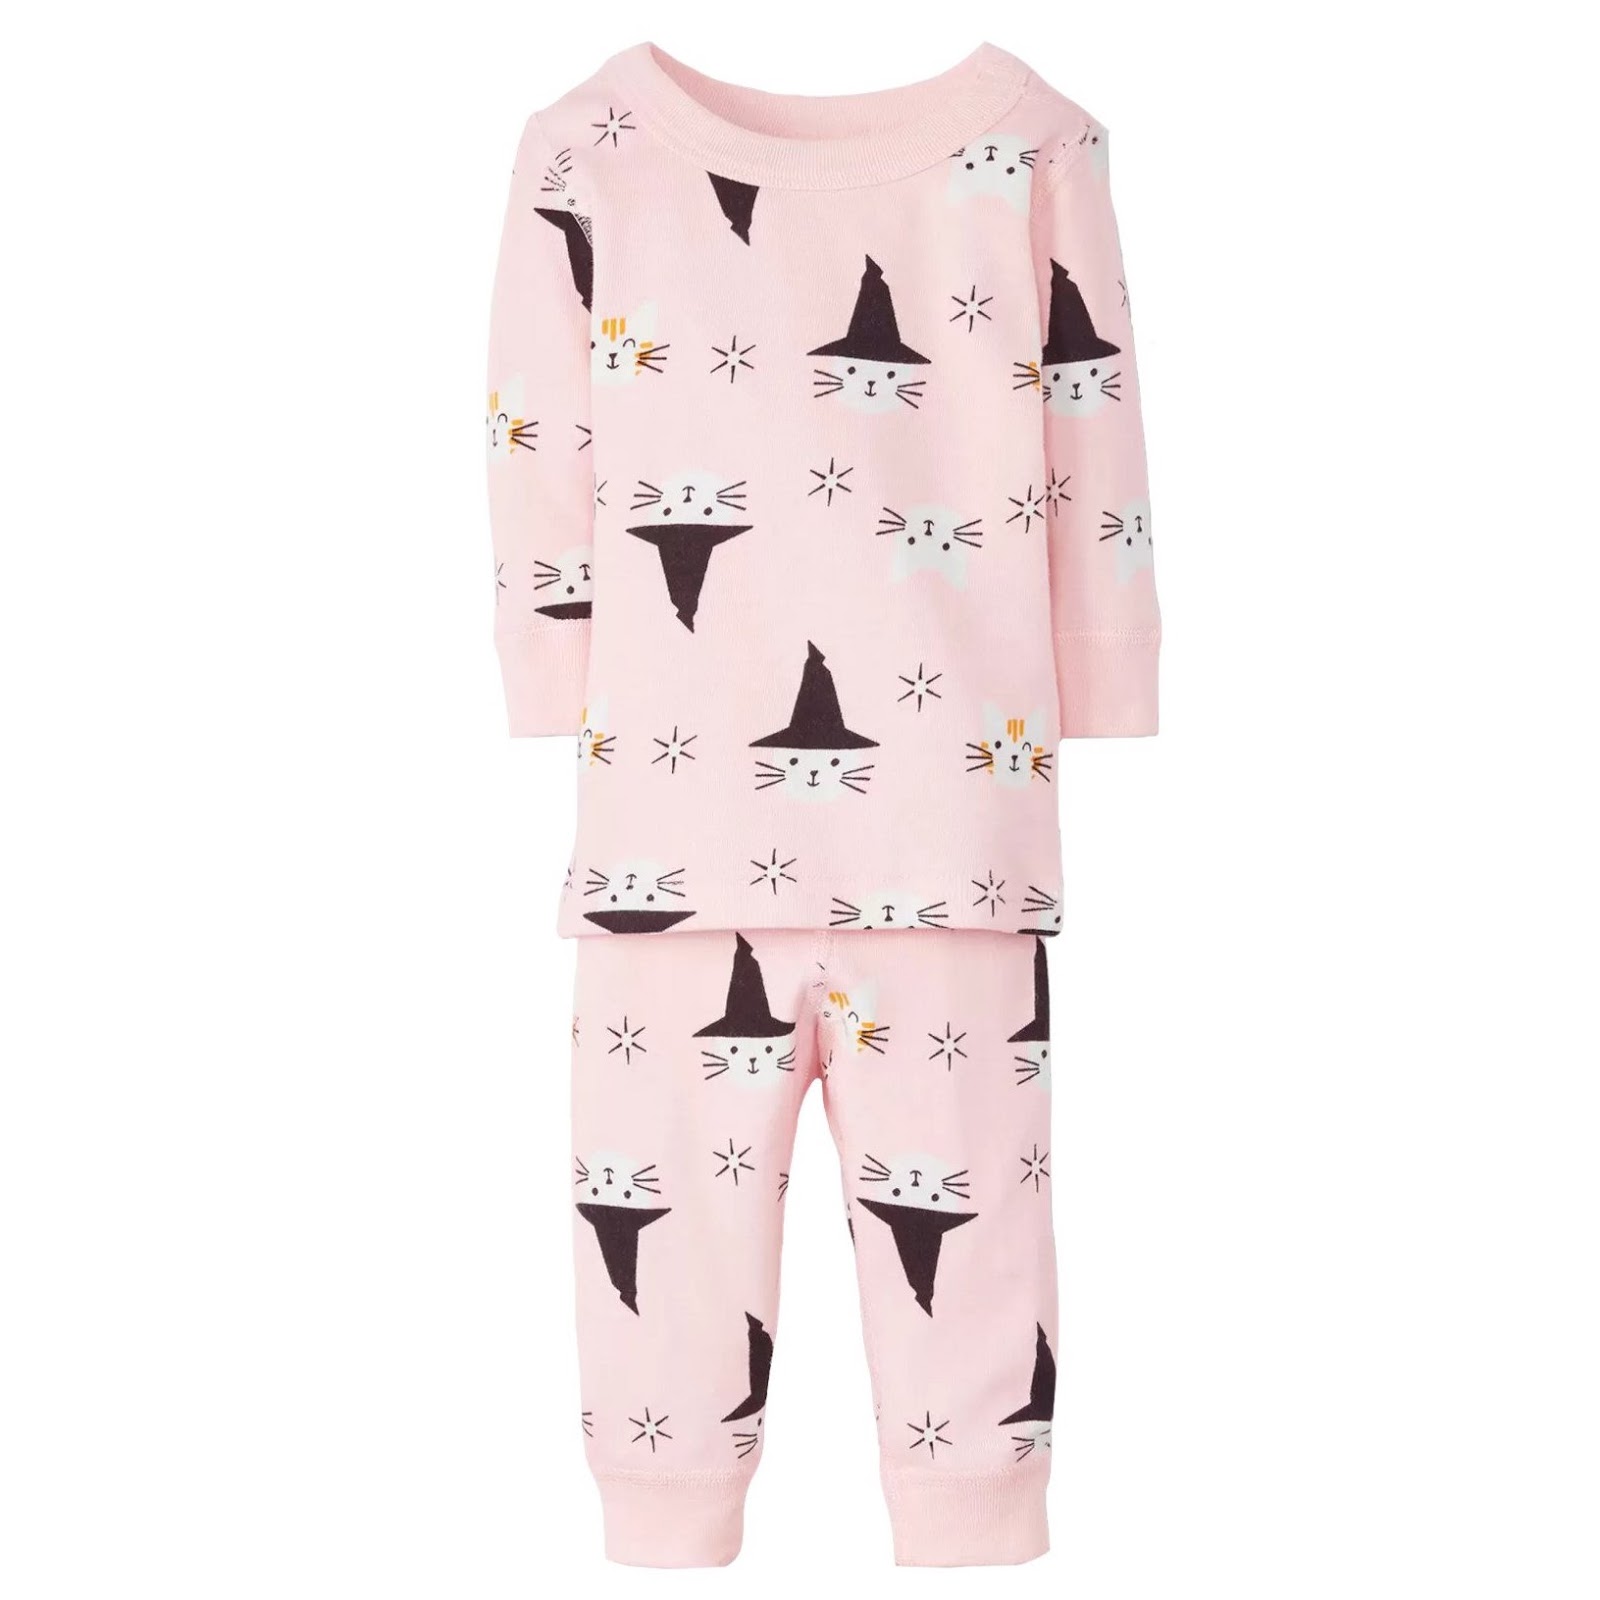 Halloween Cat Pajamas from Hanna Andersson